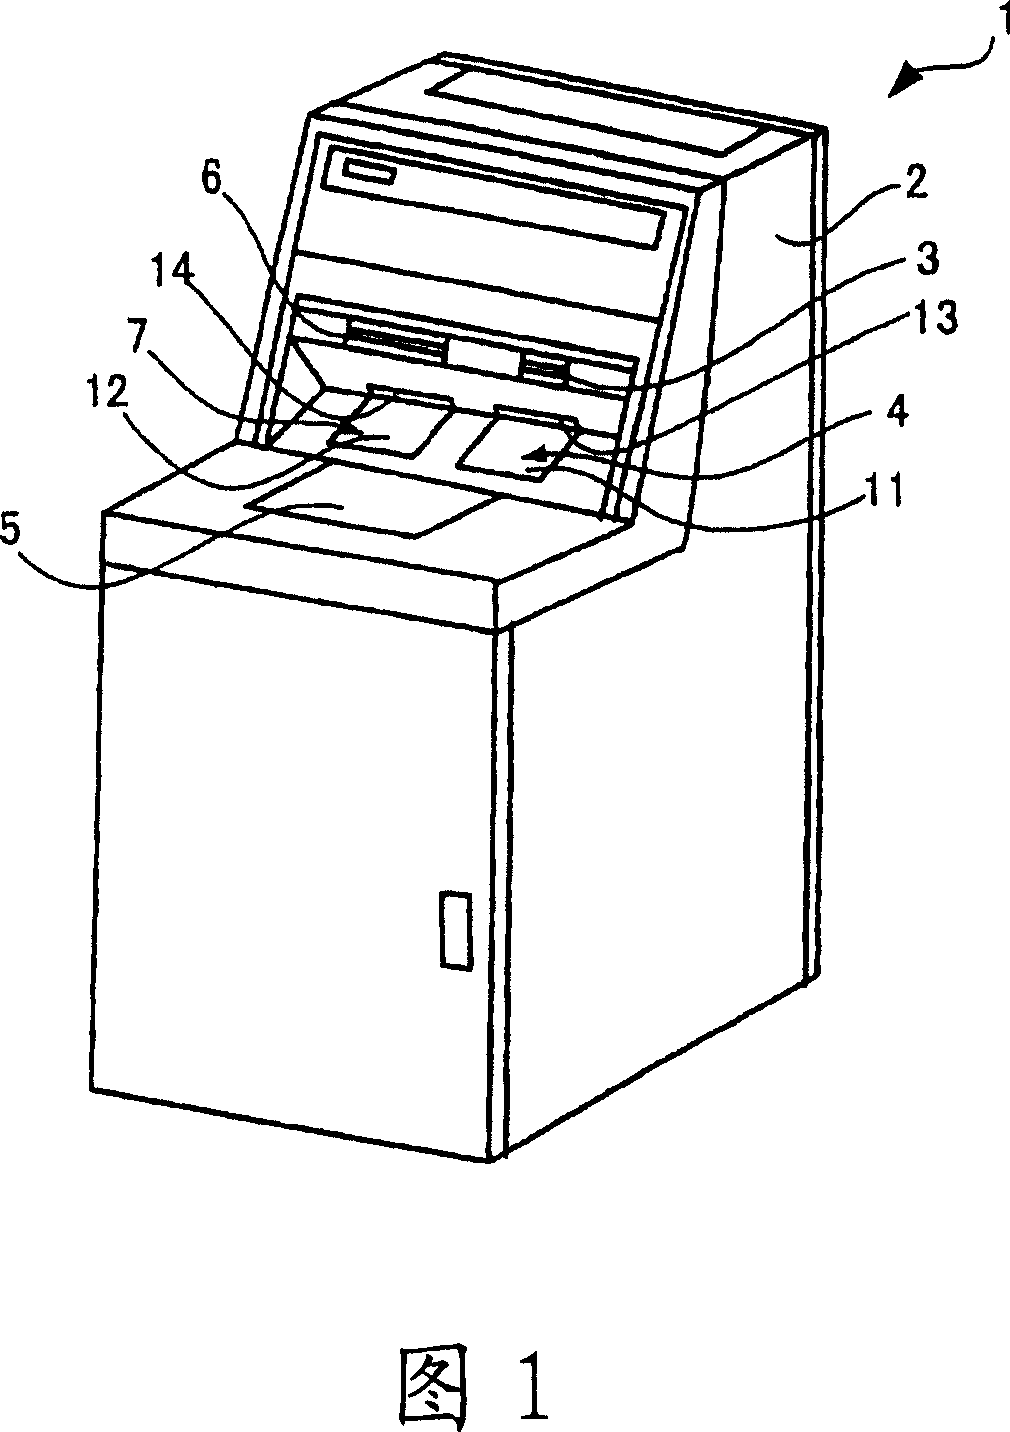 Shutter opening and closing apparatus